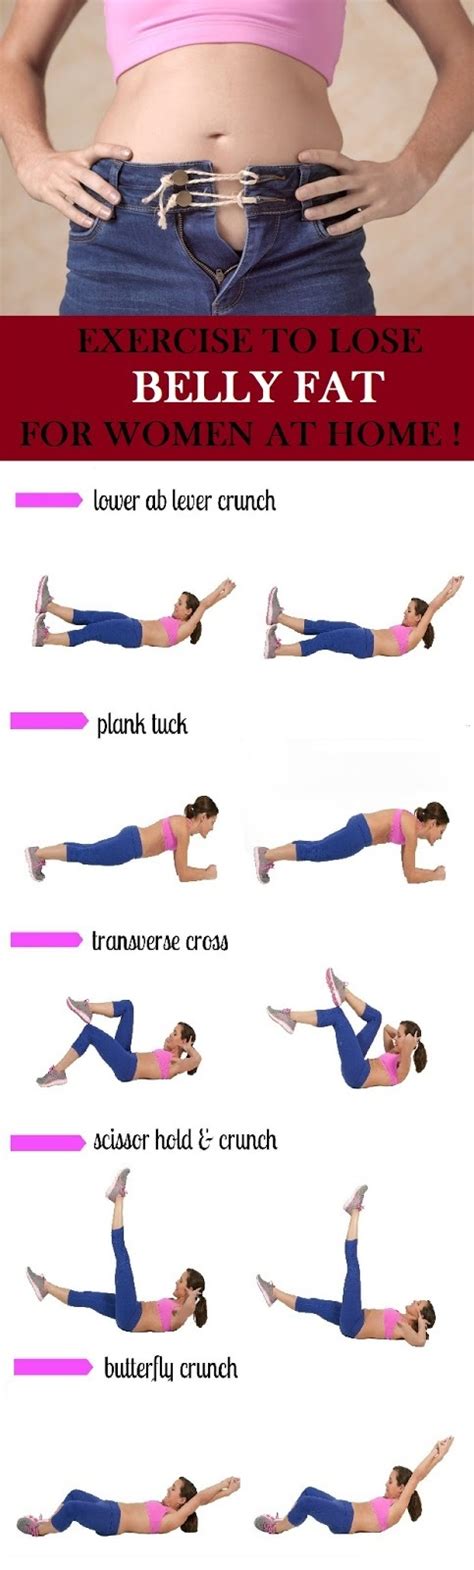 Best Exercises To Lose Belly Fat Female